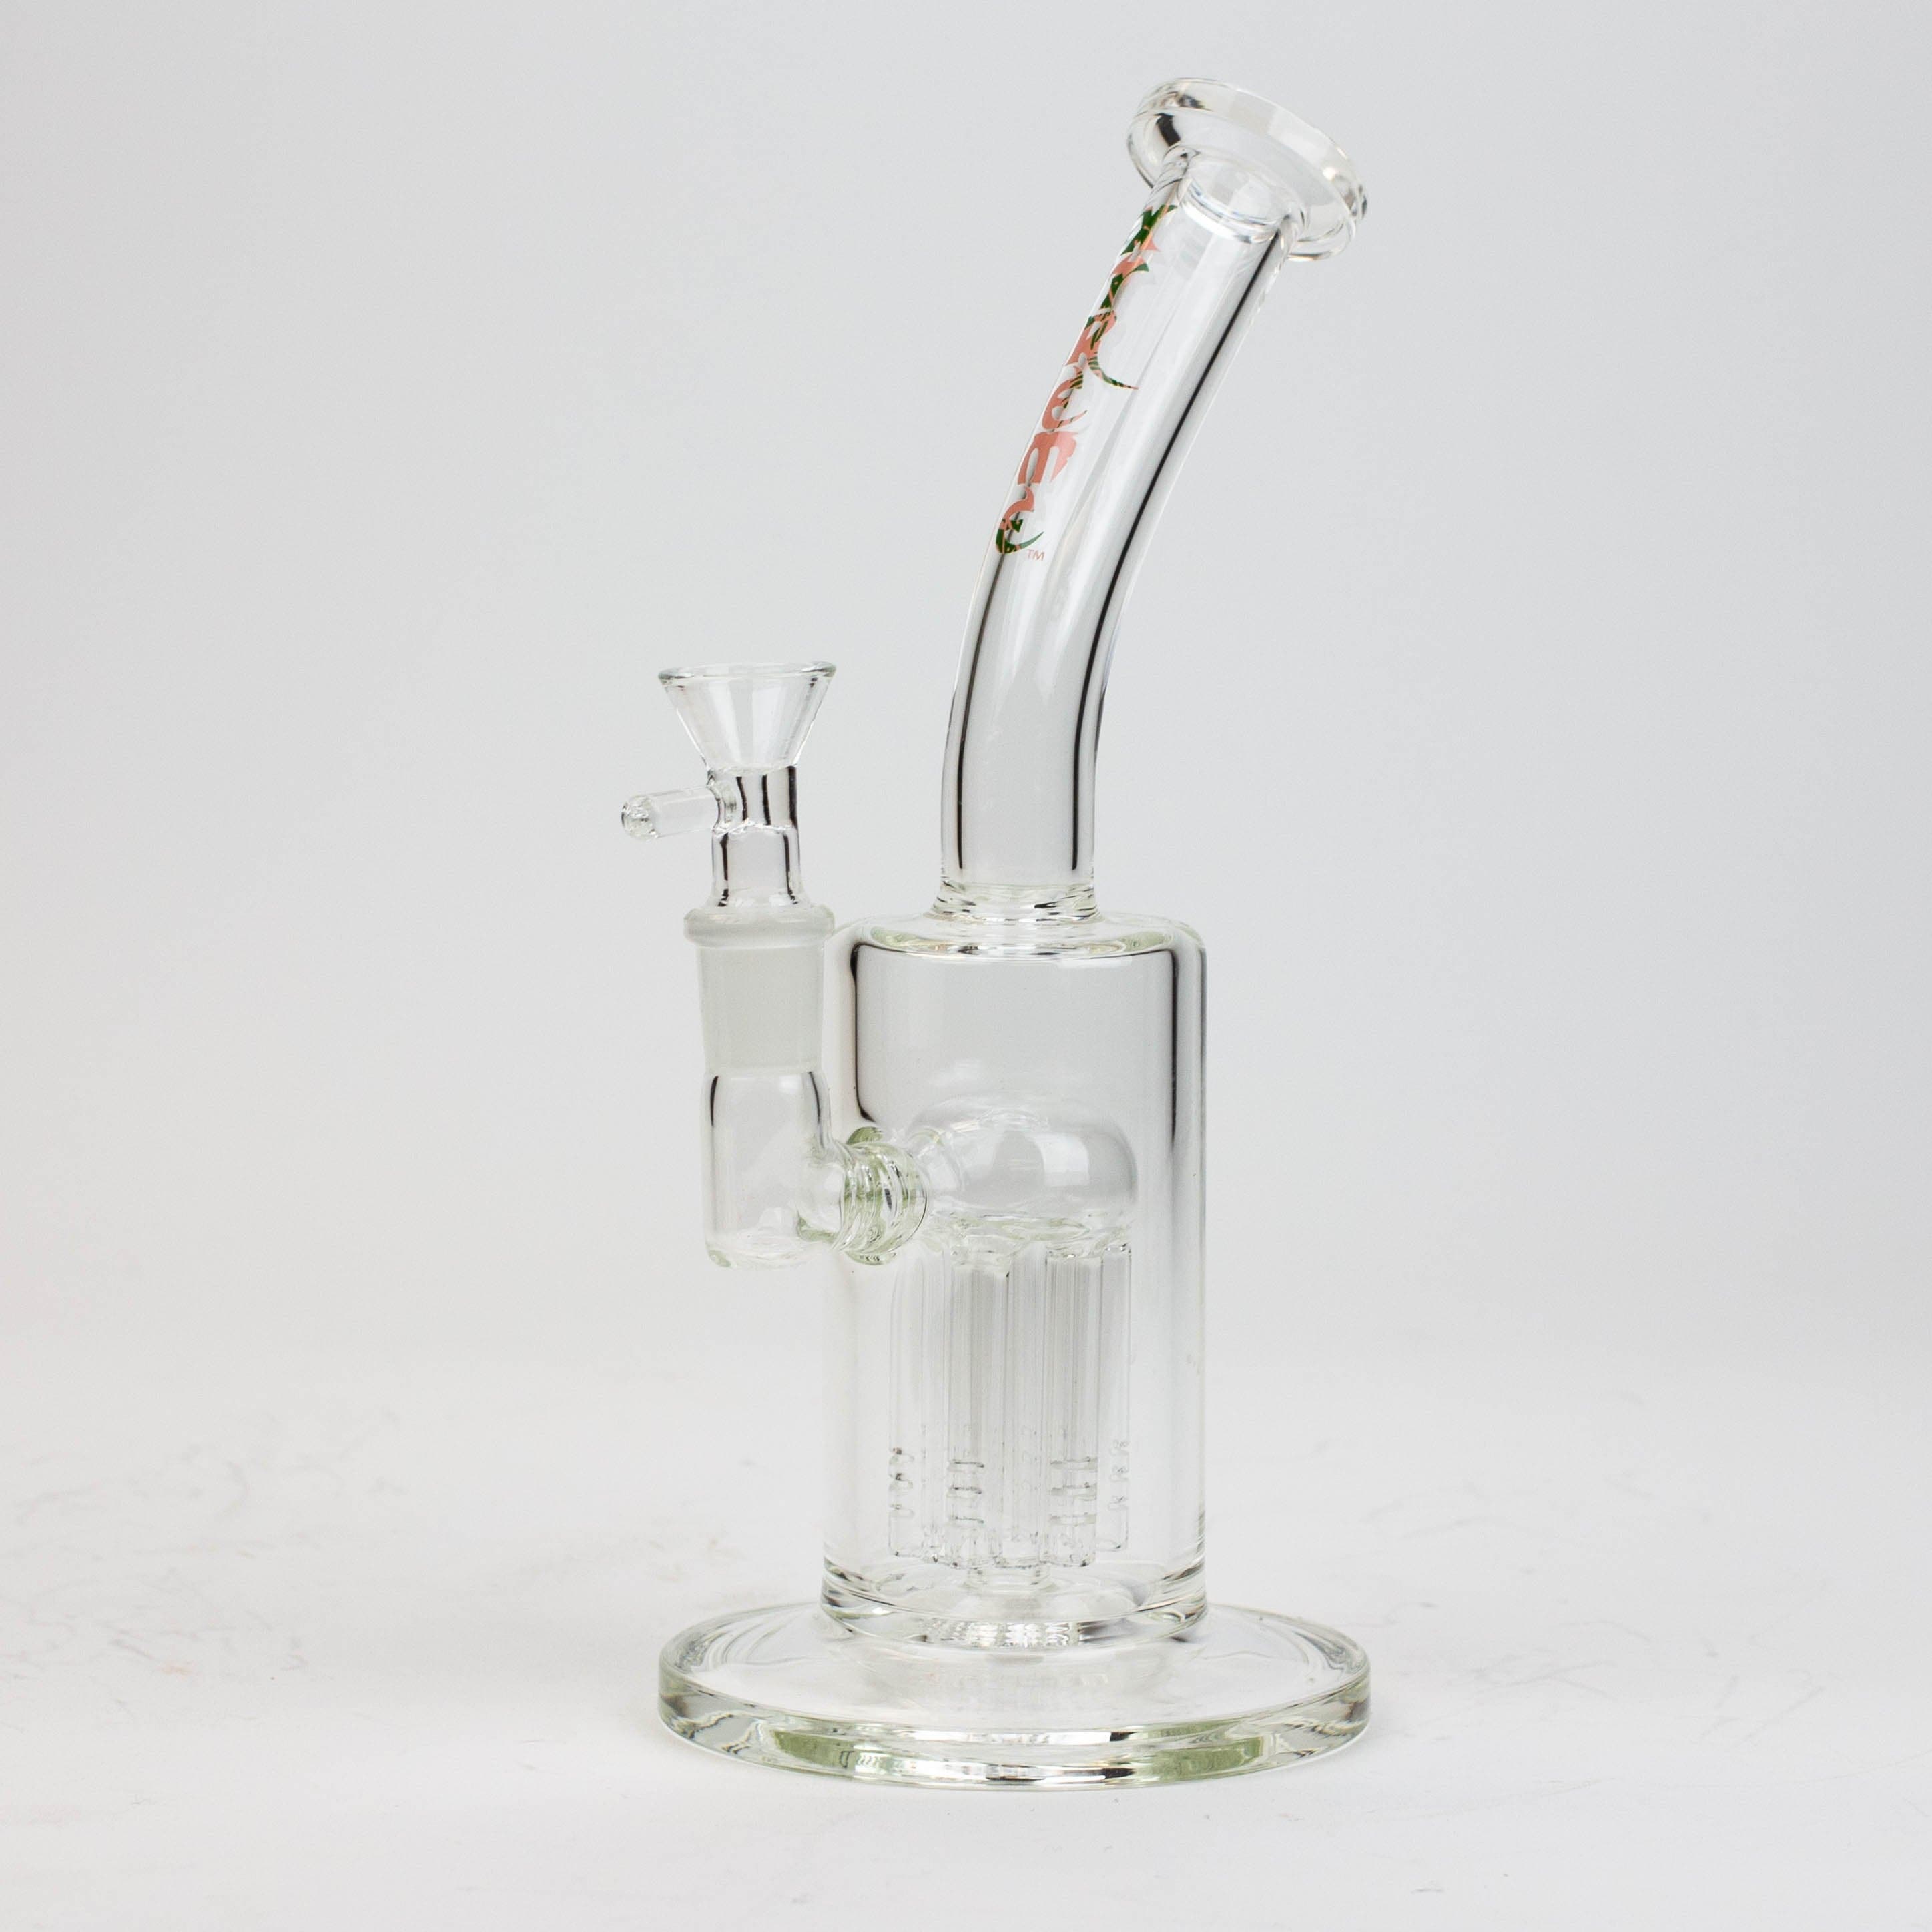 Xtreme tree-arm diffuser glass pipes_3